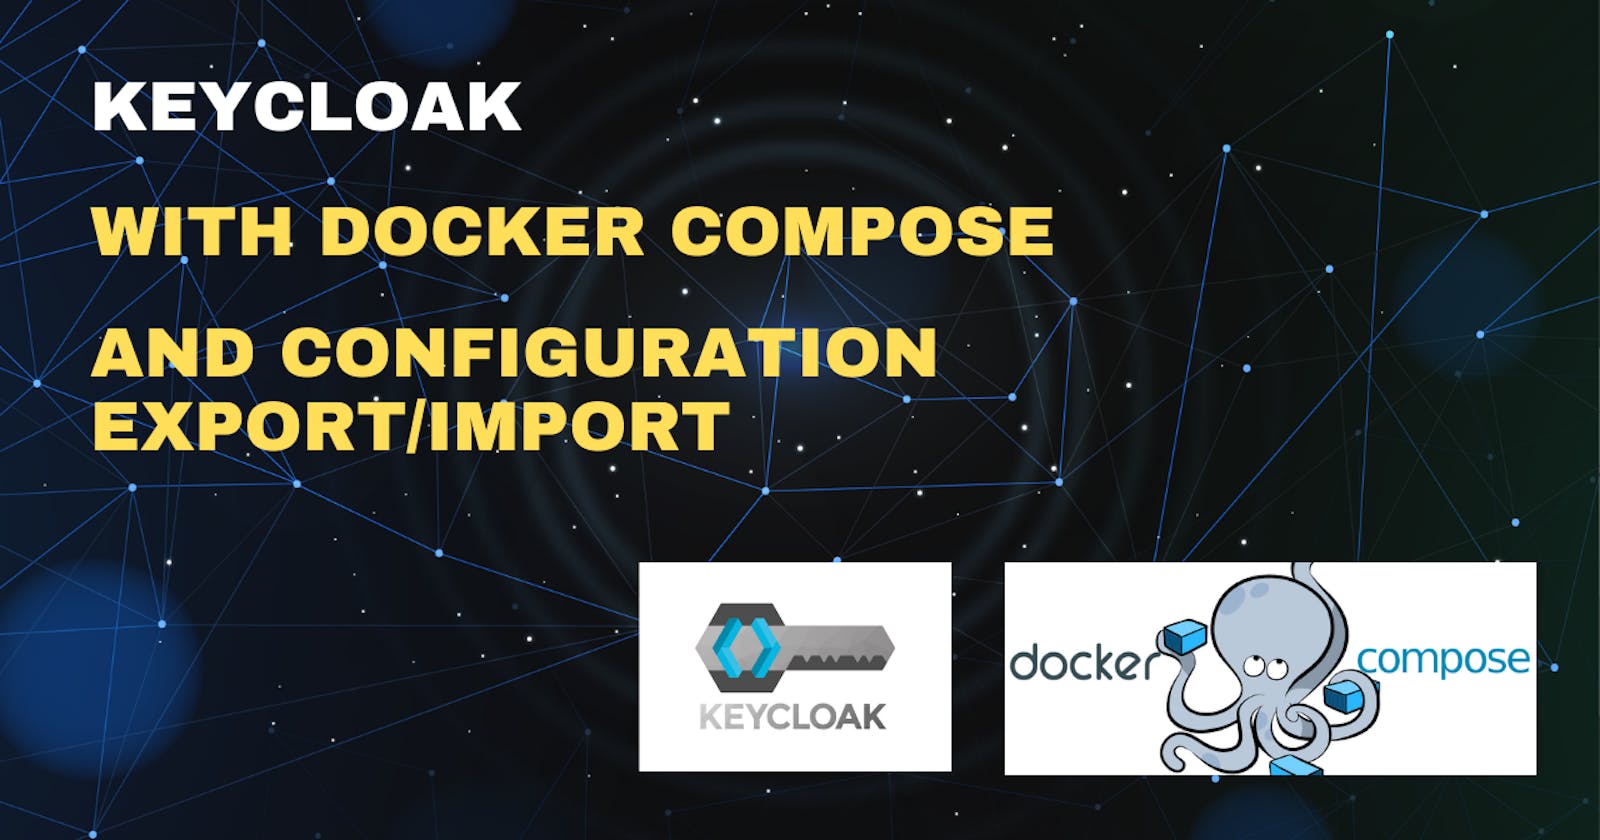 Keycloak with docker compose and configuration export/import